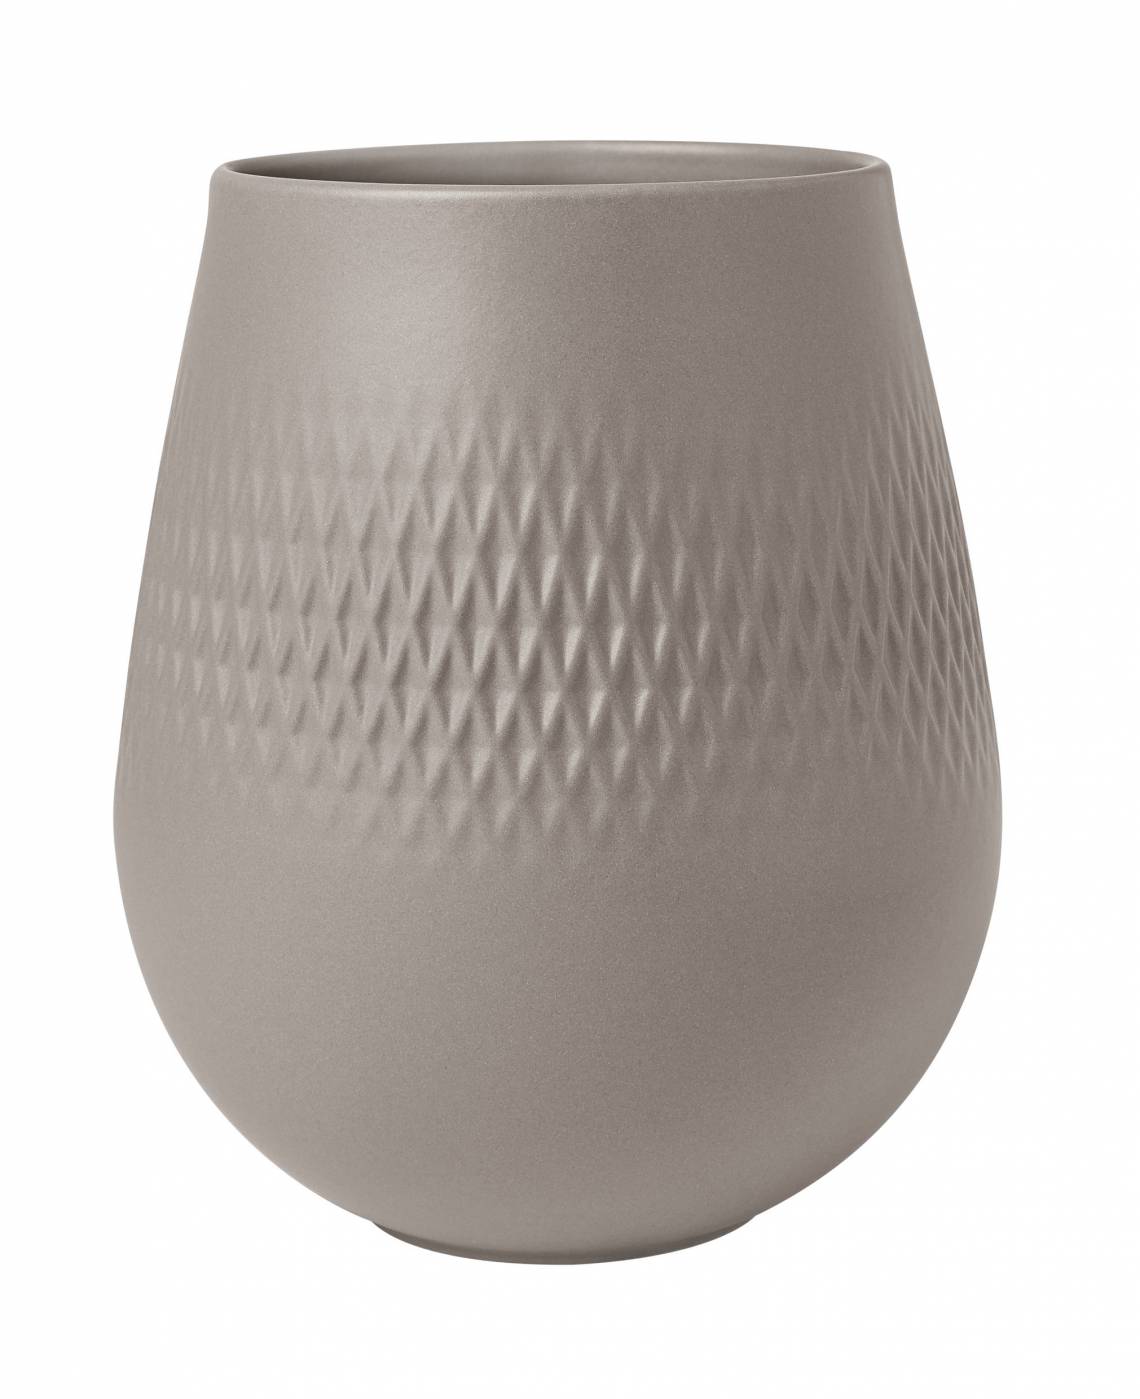 Villeroy & Boch Manufacture Collier Vase in Taupe